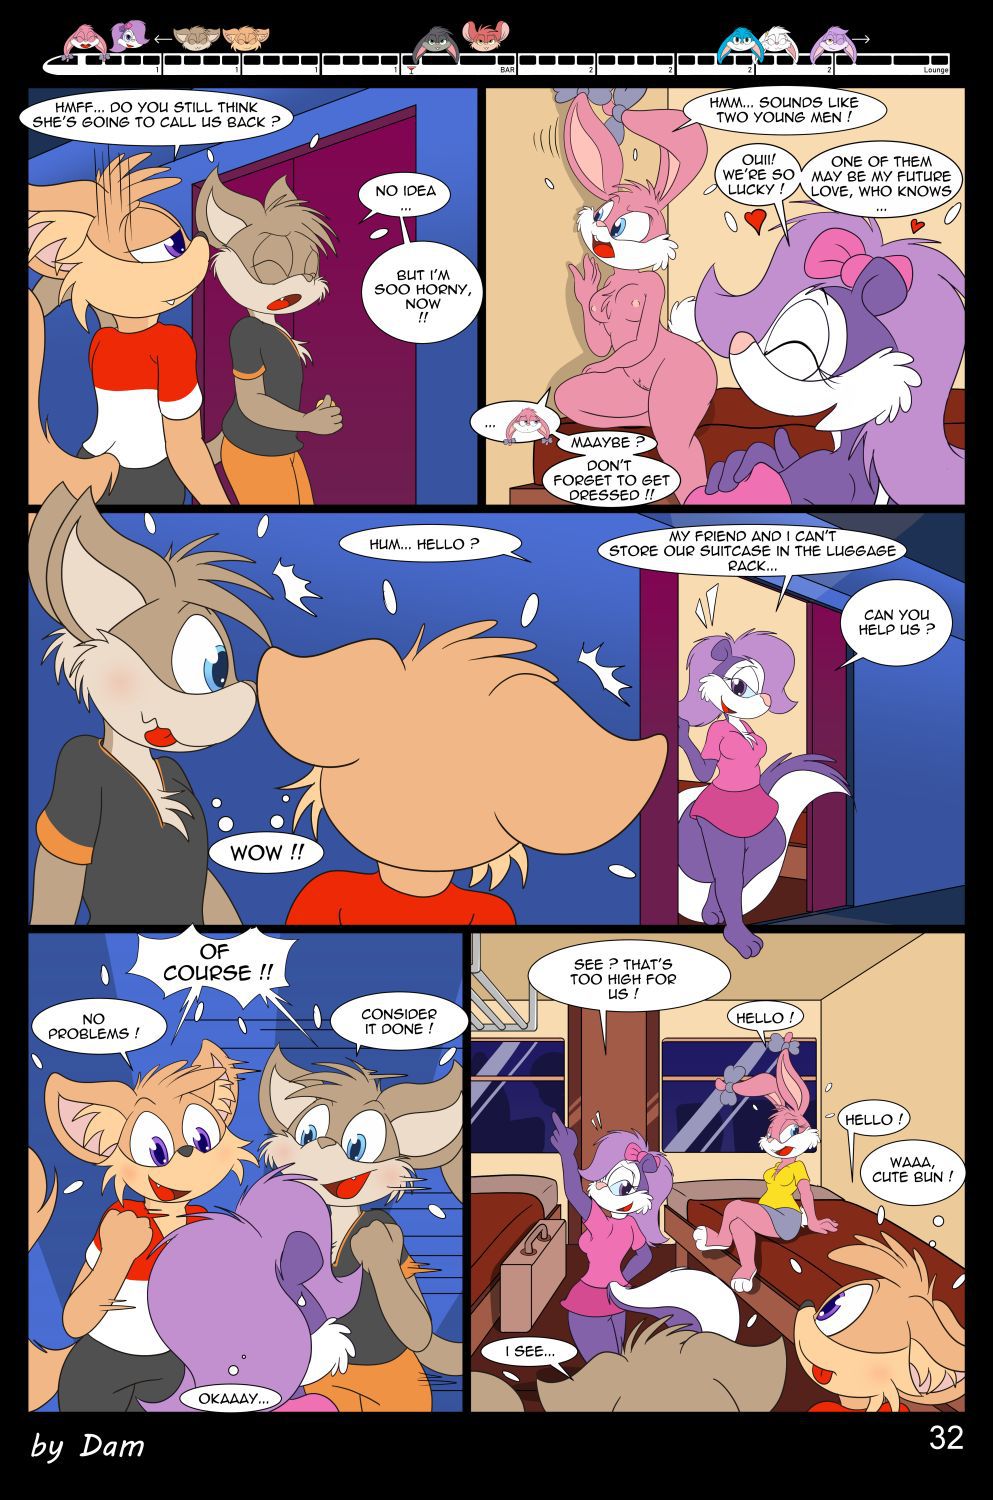 [Dam] Toons on a train [Ongoing] 32